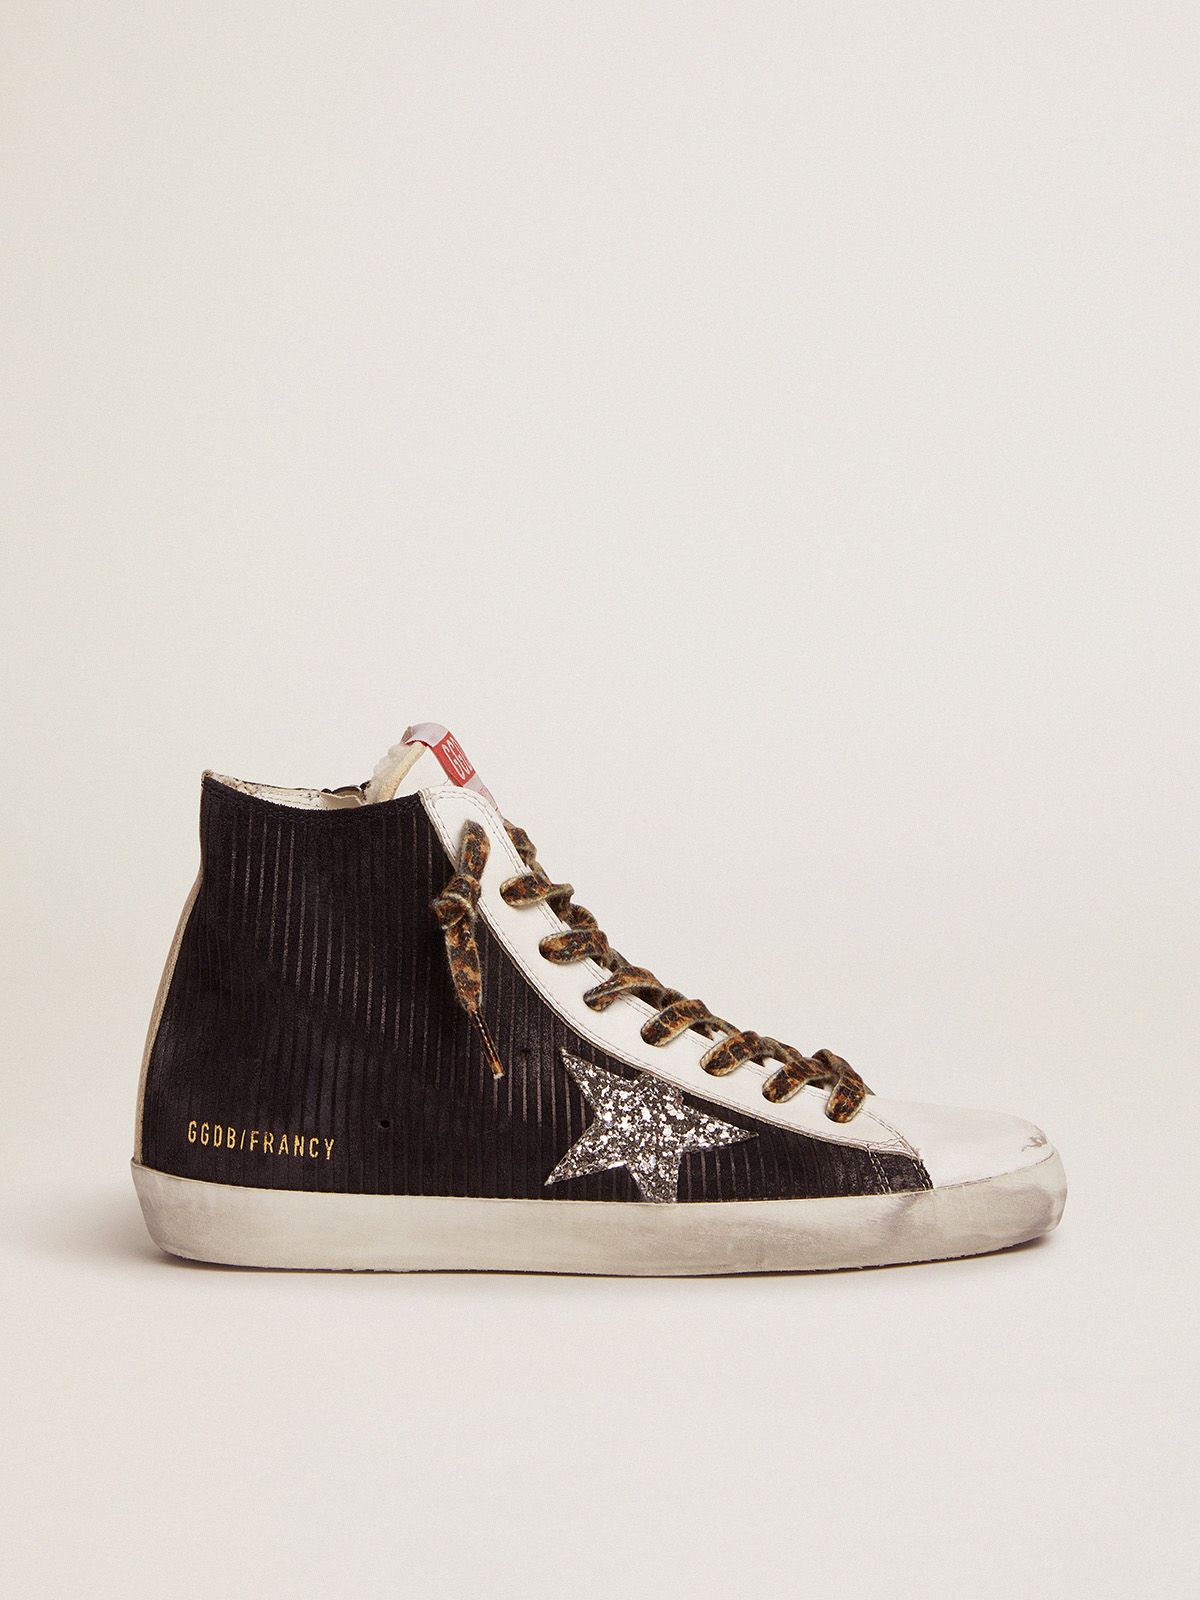 Francy sneakers in black suede with corduroy print and shearling lining